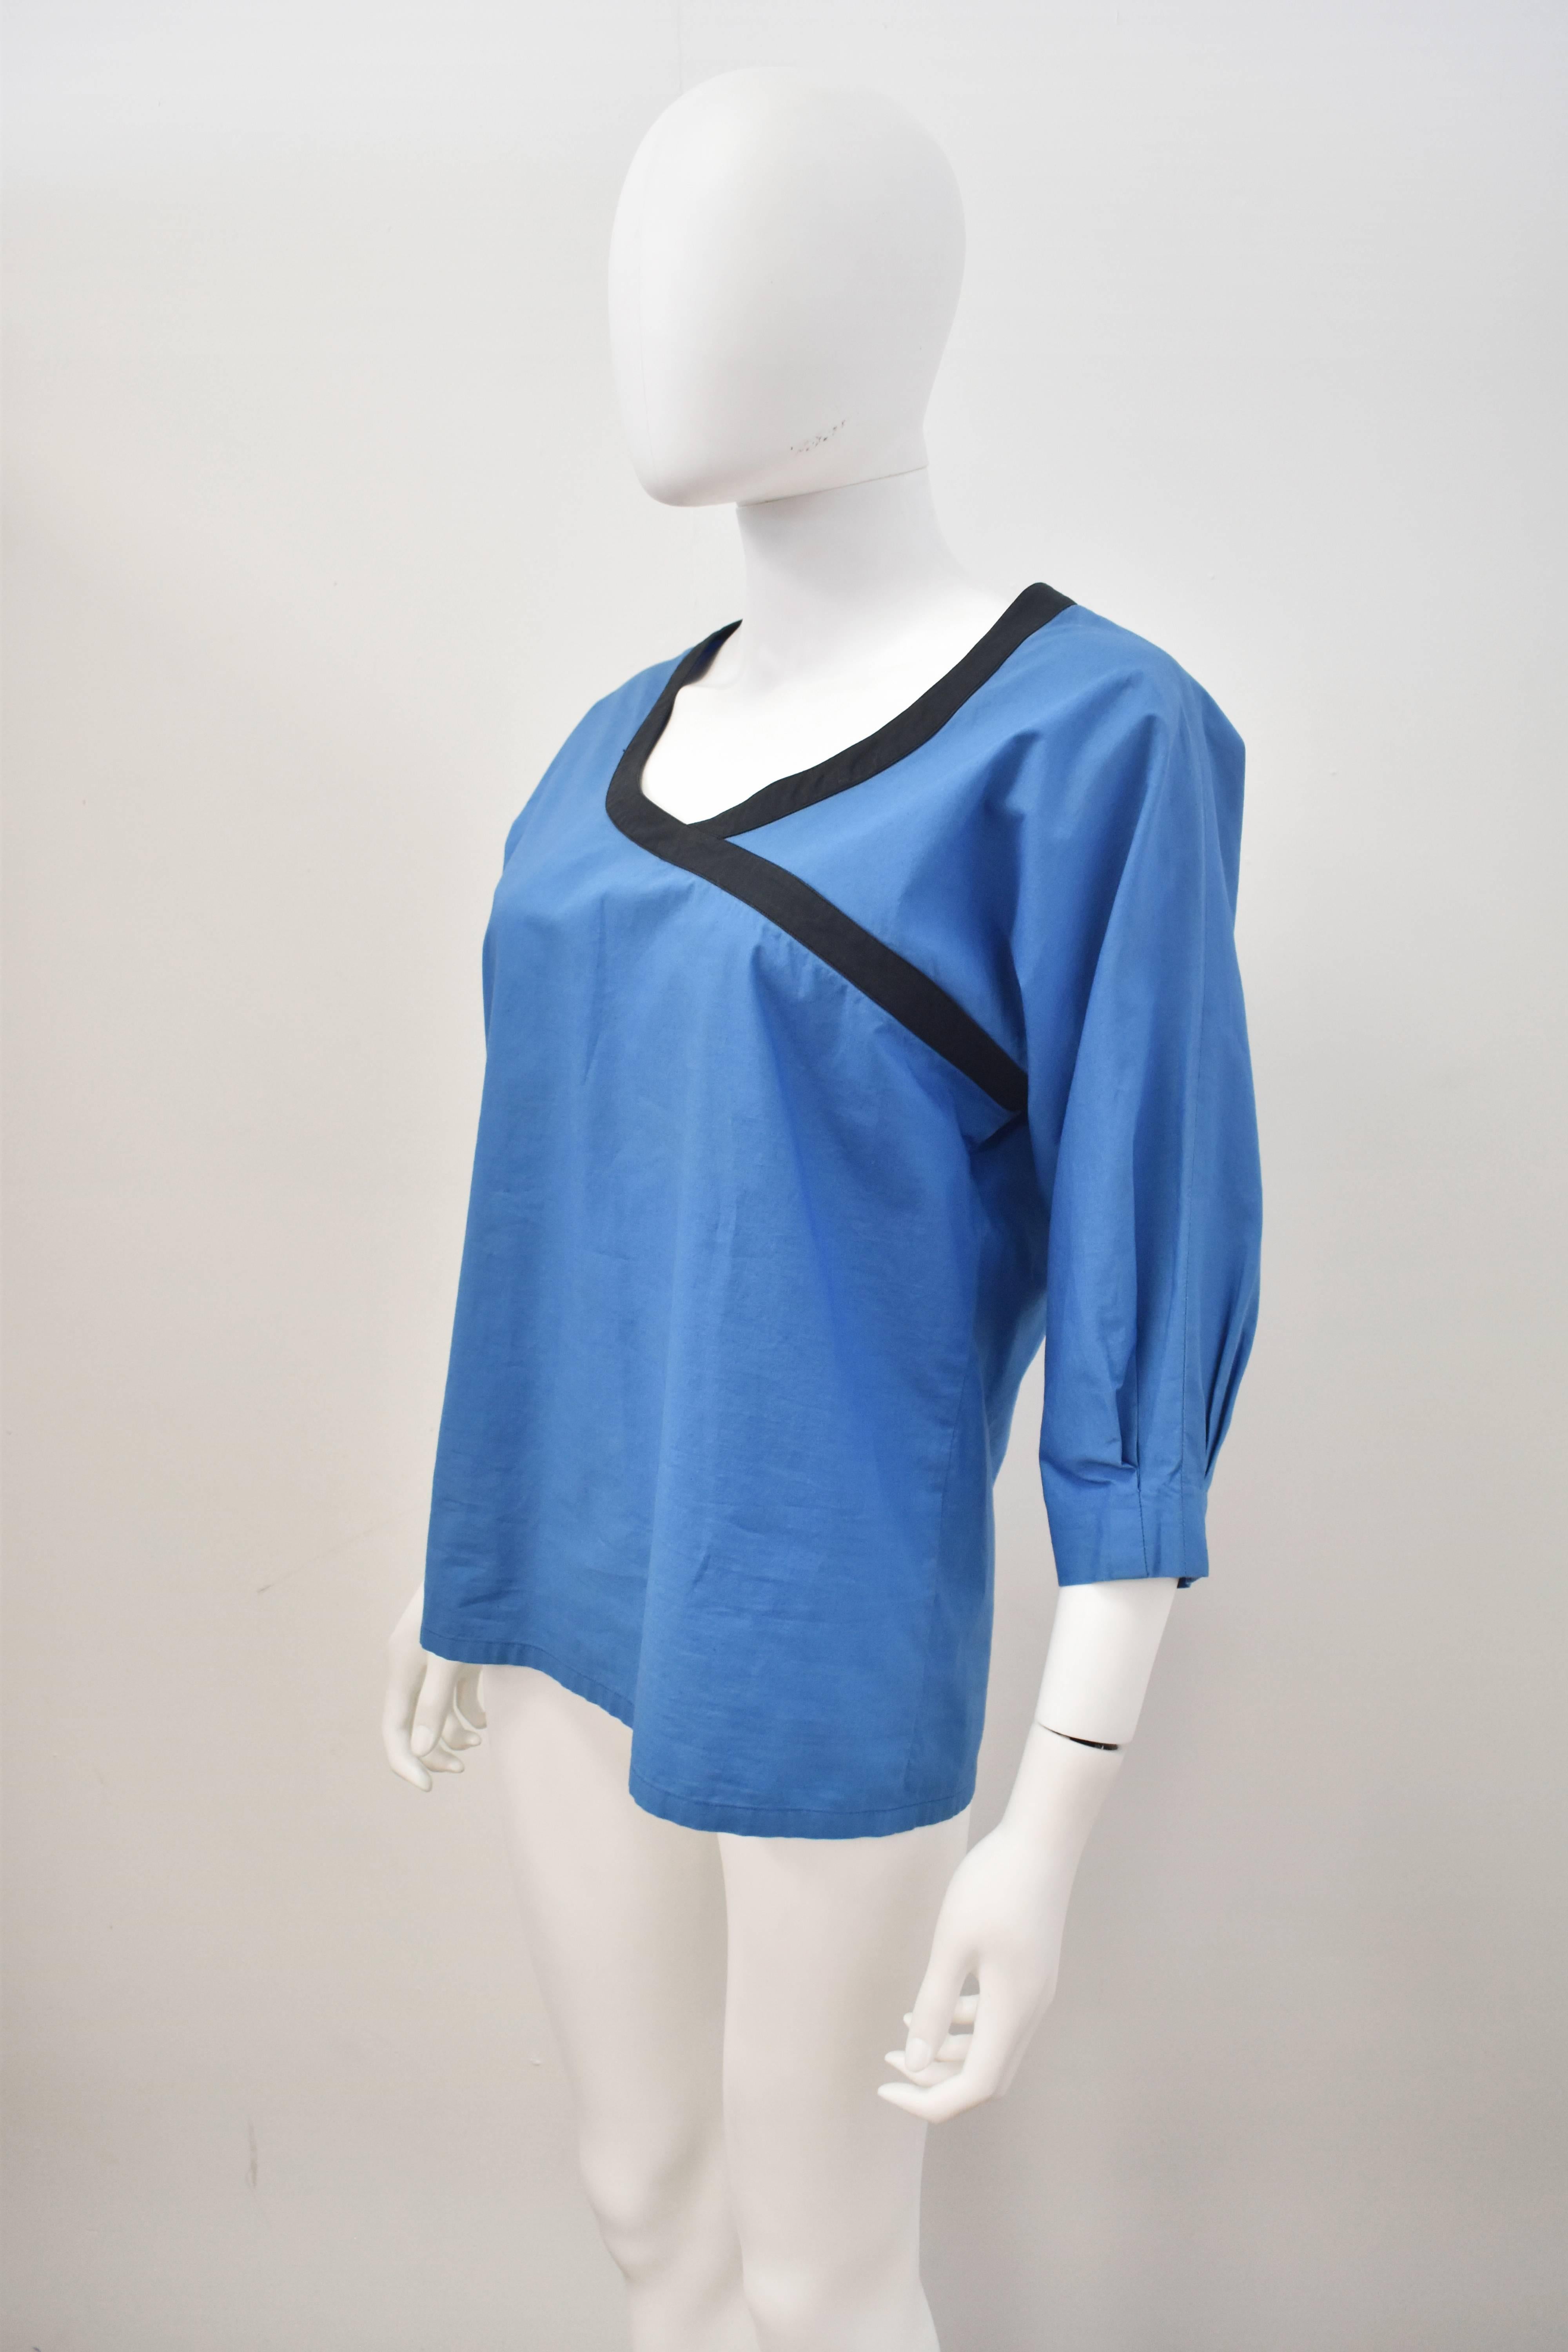 A blue raglan three-quarter length sleeve boxy top by Lanvin. It features a black band along the neckline that extends diagonally towards the left sleeve. The sleeves are pleated at the cuff to create a light balloon-like effect. Apart from very